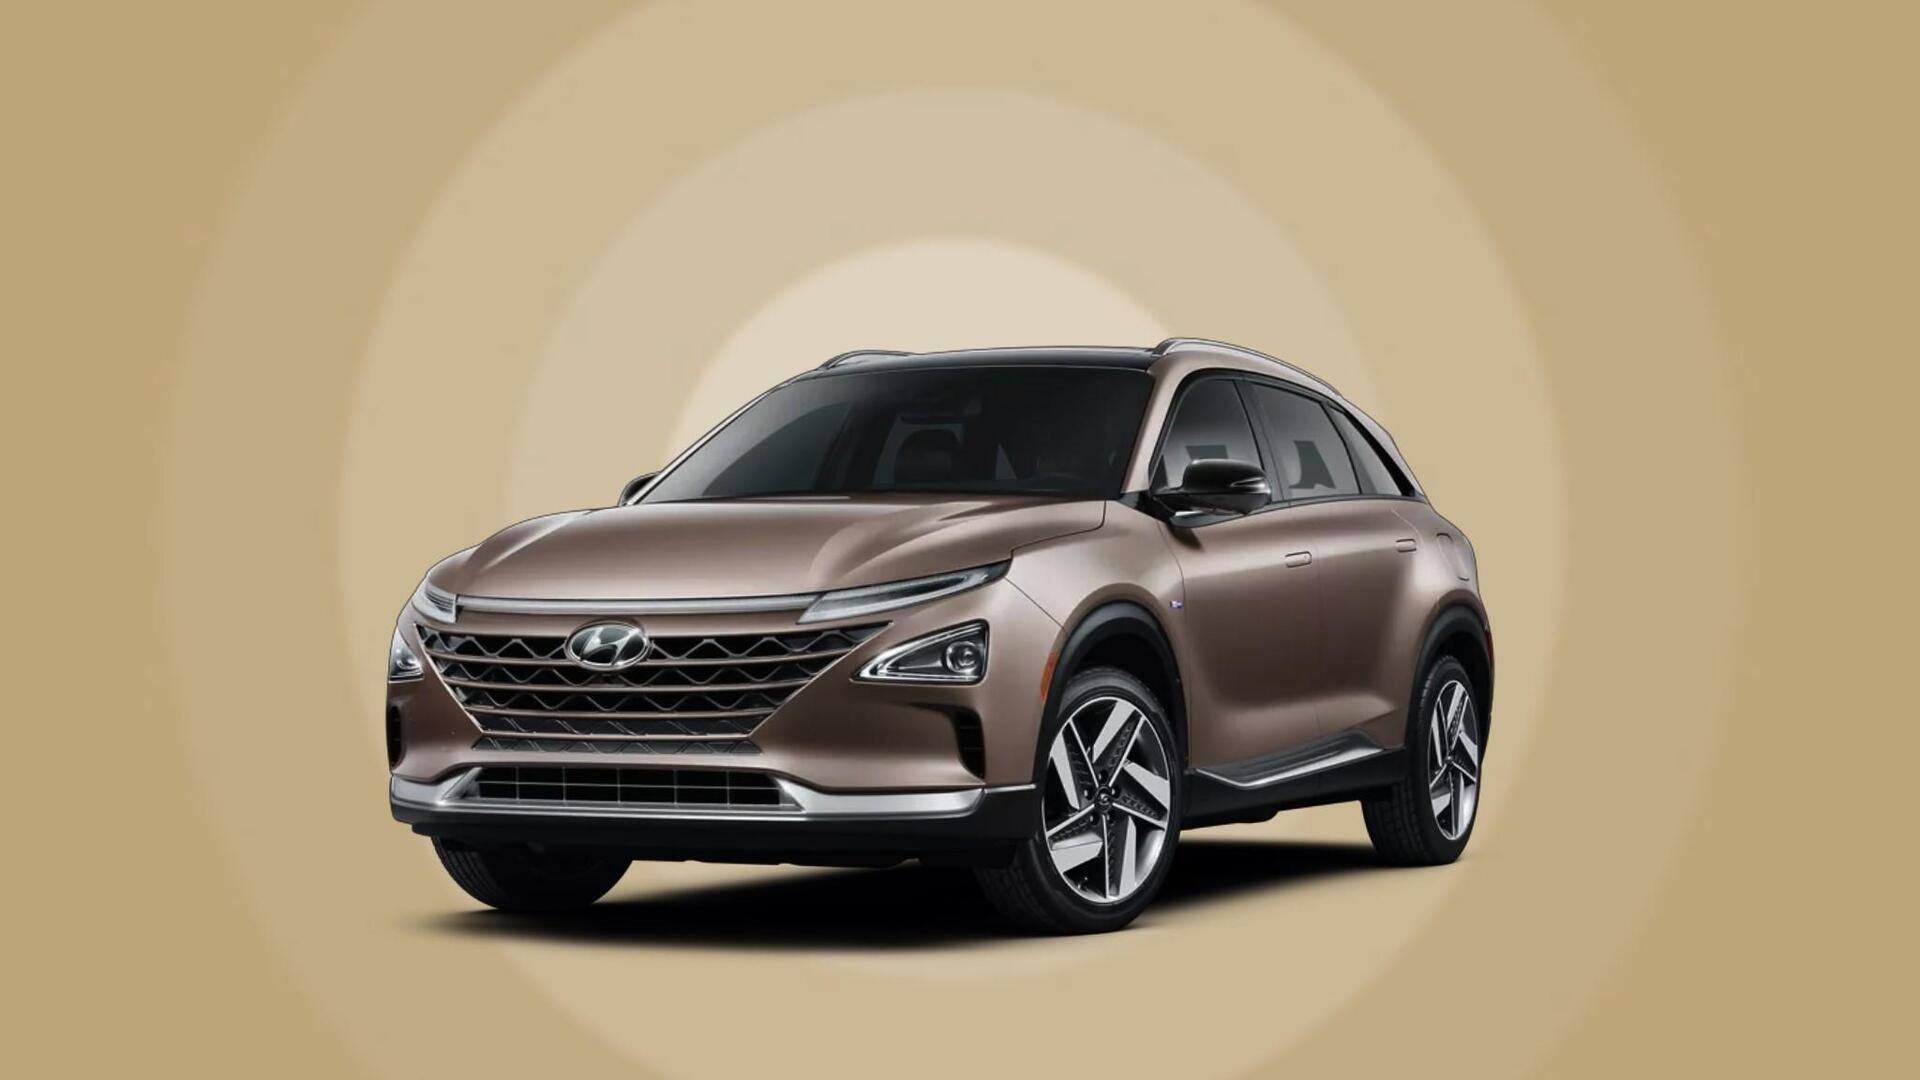 Hyundai's only hydrogen fuel cell car showcased: Check best features